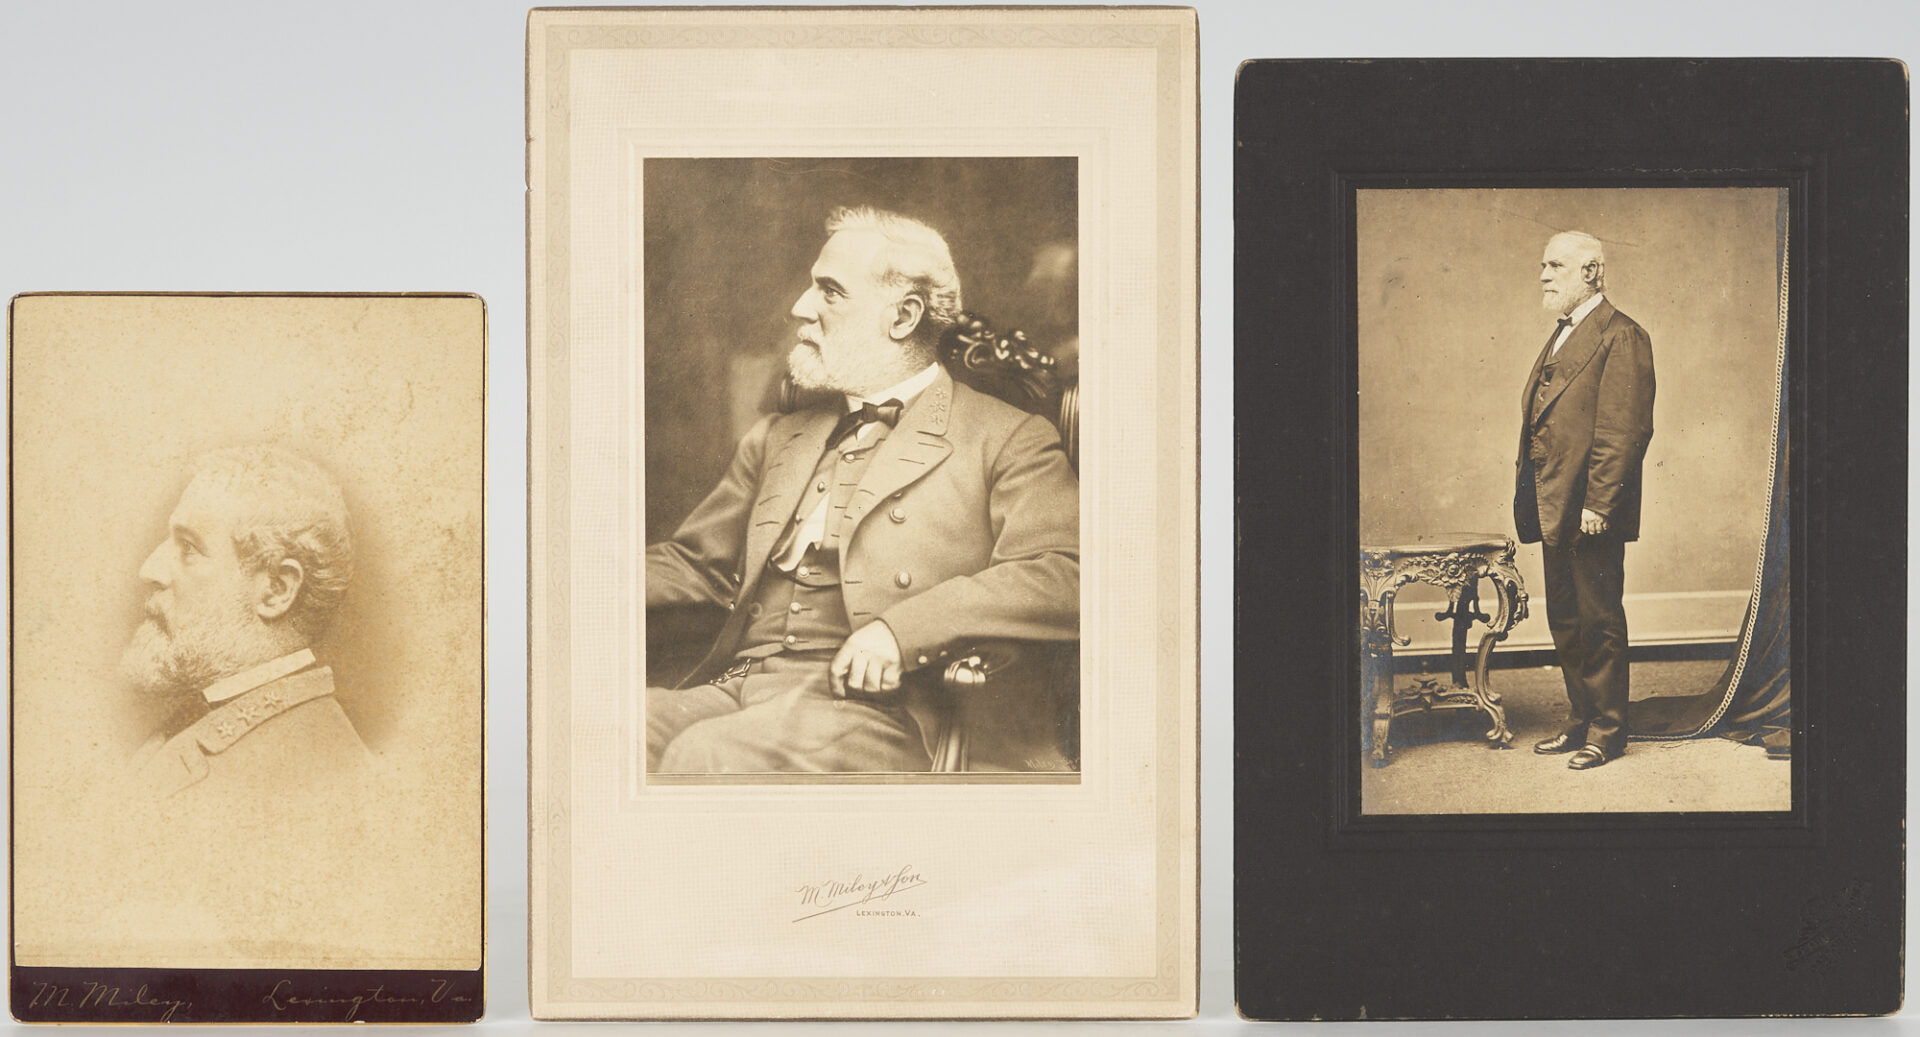 Lot 579: Group of 3 Robert E. Lee Cabinet Card Photographs, Miley Studio